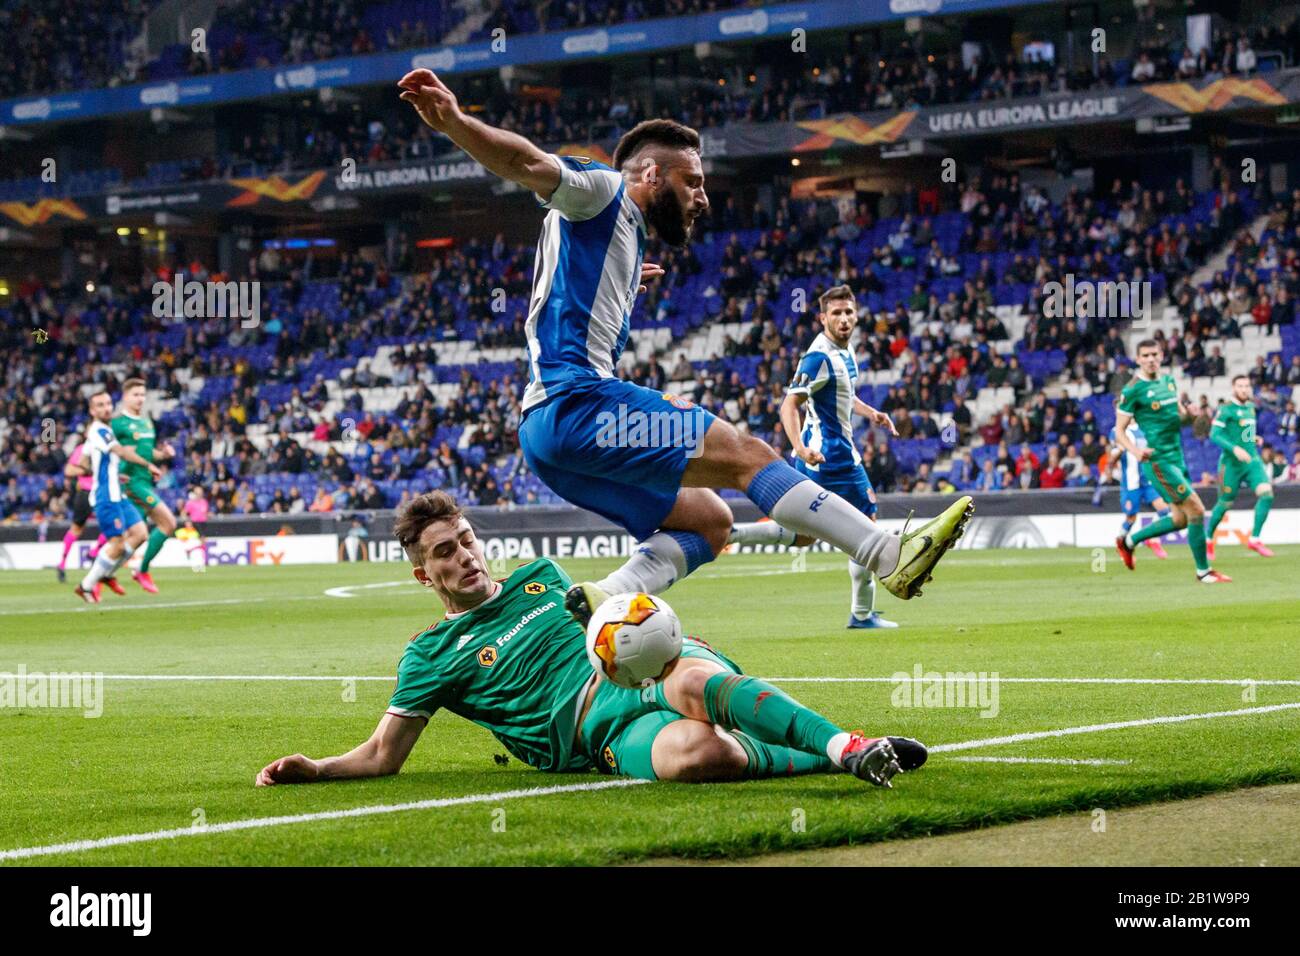 Barcelona, Spain. 27th Feb 2020.  Leander Dendoncker of Wolverhampton Wanderers F.C. in action with Matias Vargas of RCD Espanyol during the UEFA Europa League round of 32 second leg match between RCD Espanyol and Wolverhampton Wanderers at RCD Stadium on February 27, 2020 in Barcelona, Spain. Credit: Dax Images/Alamy Live News Stock Photo